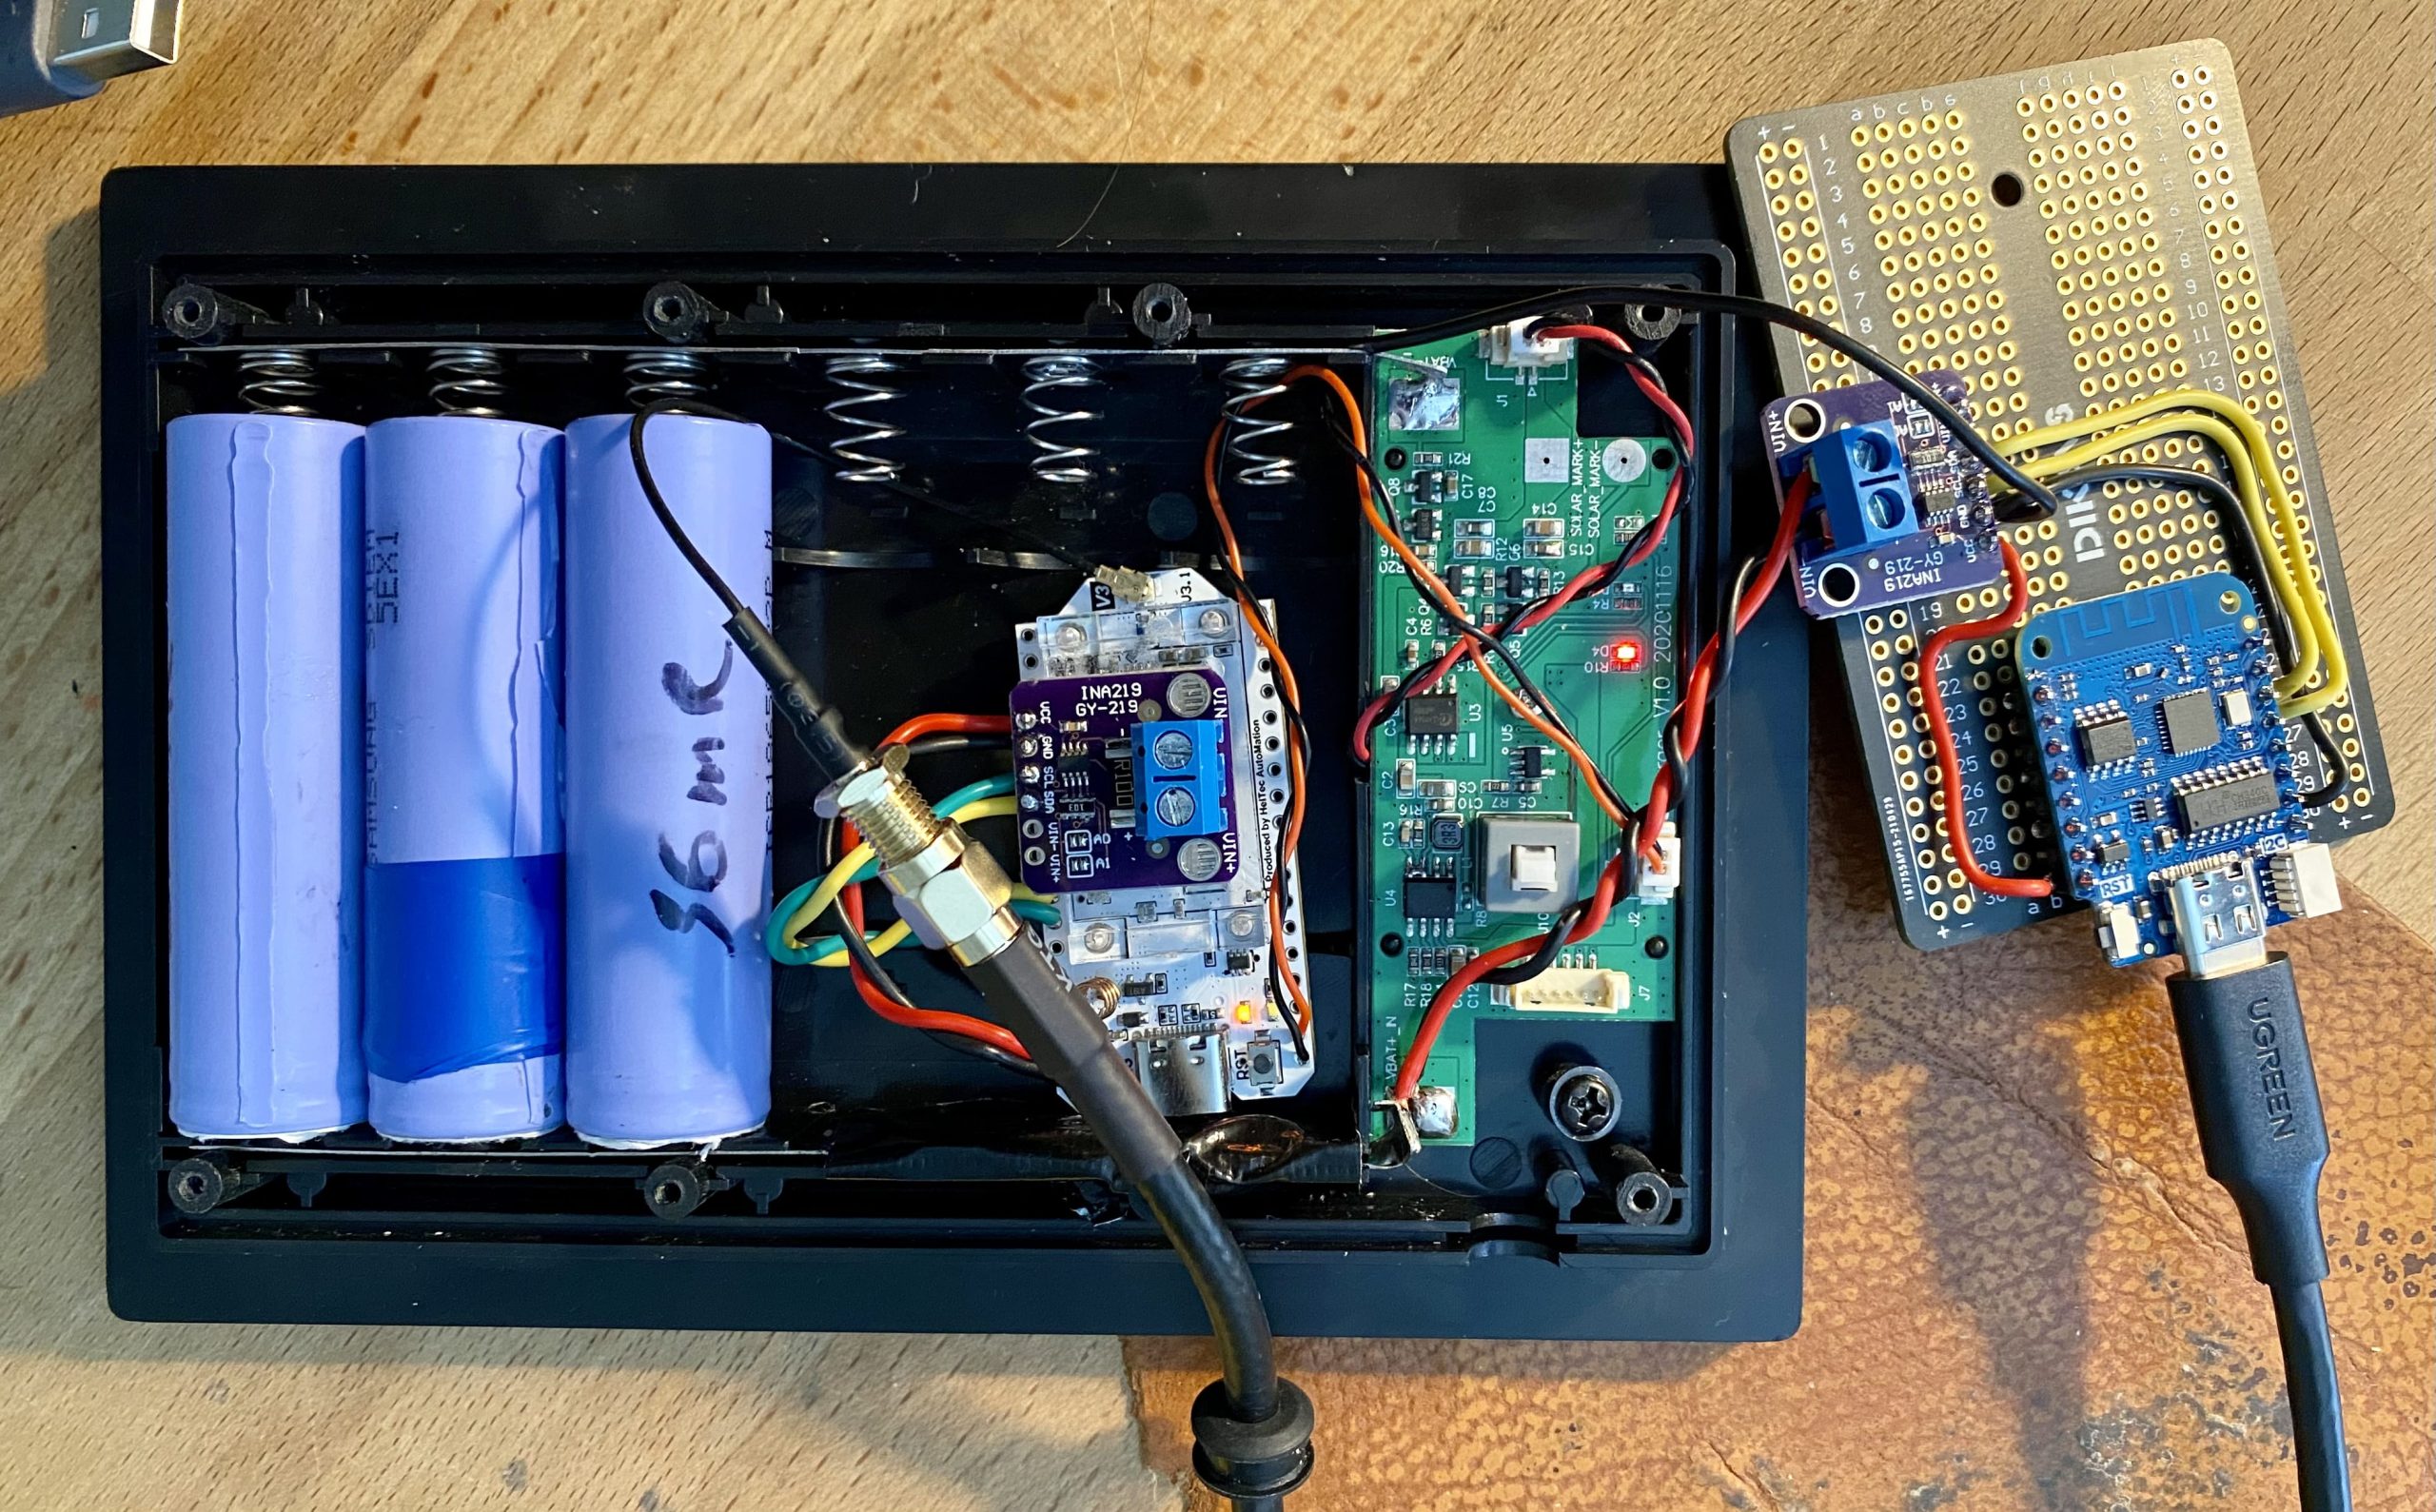 Heltec Lora 32 v3 with an INA219 power sensor inside a 4W solar panel case